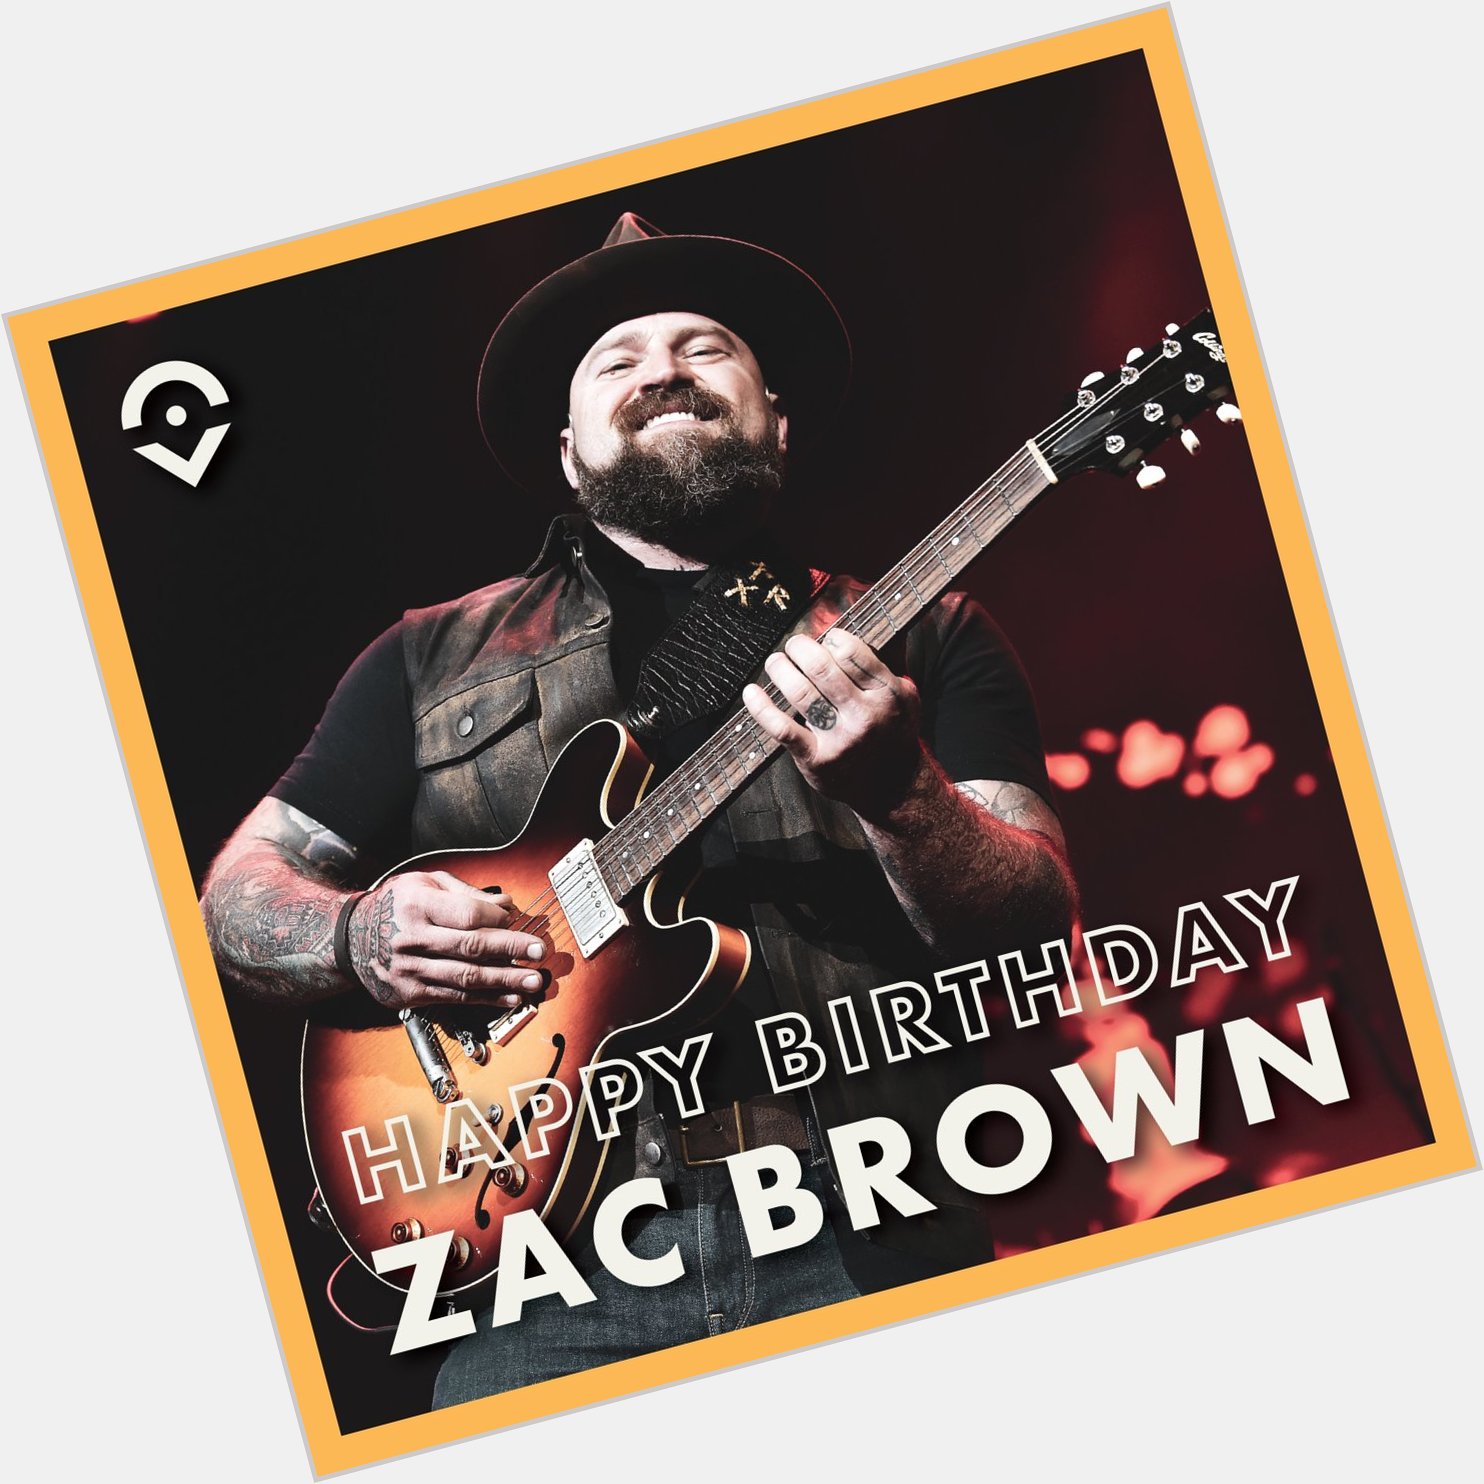 Let\s celebrate with a cold beer on a Friday, er Saturday night. Happy birthday, Zac Brown of 